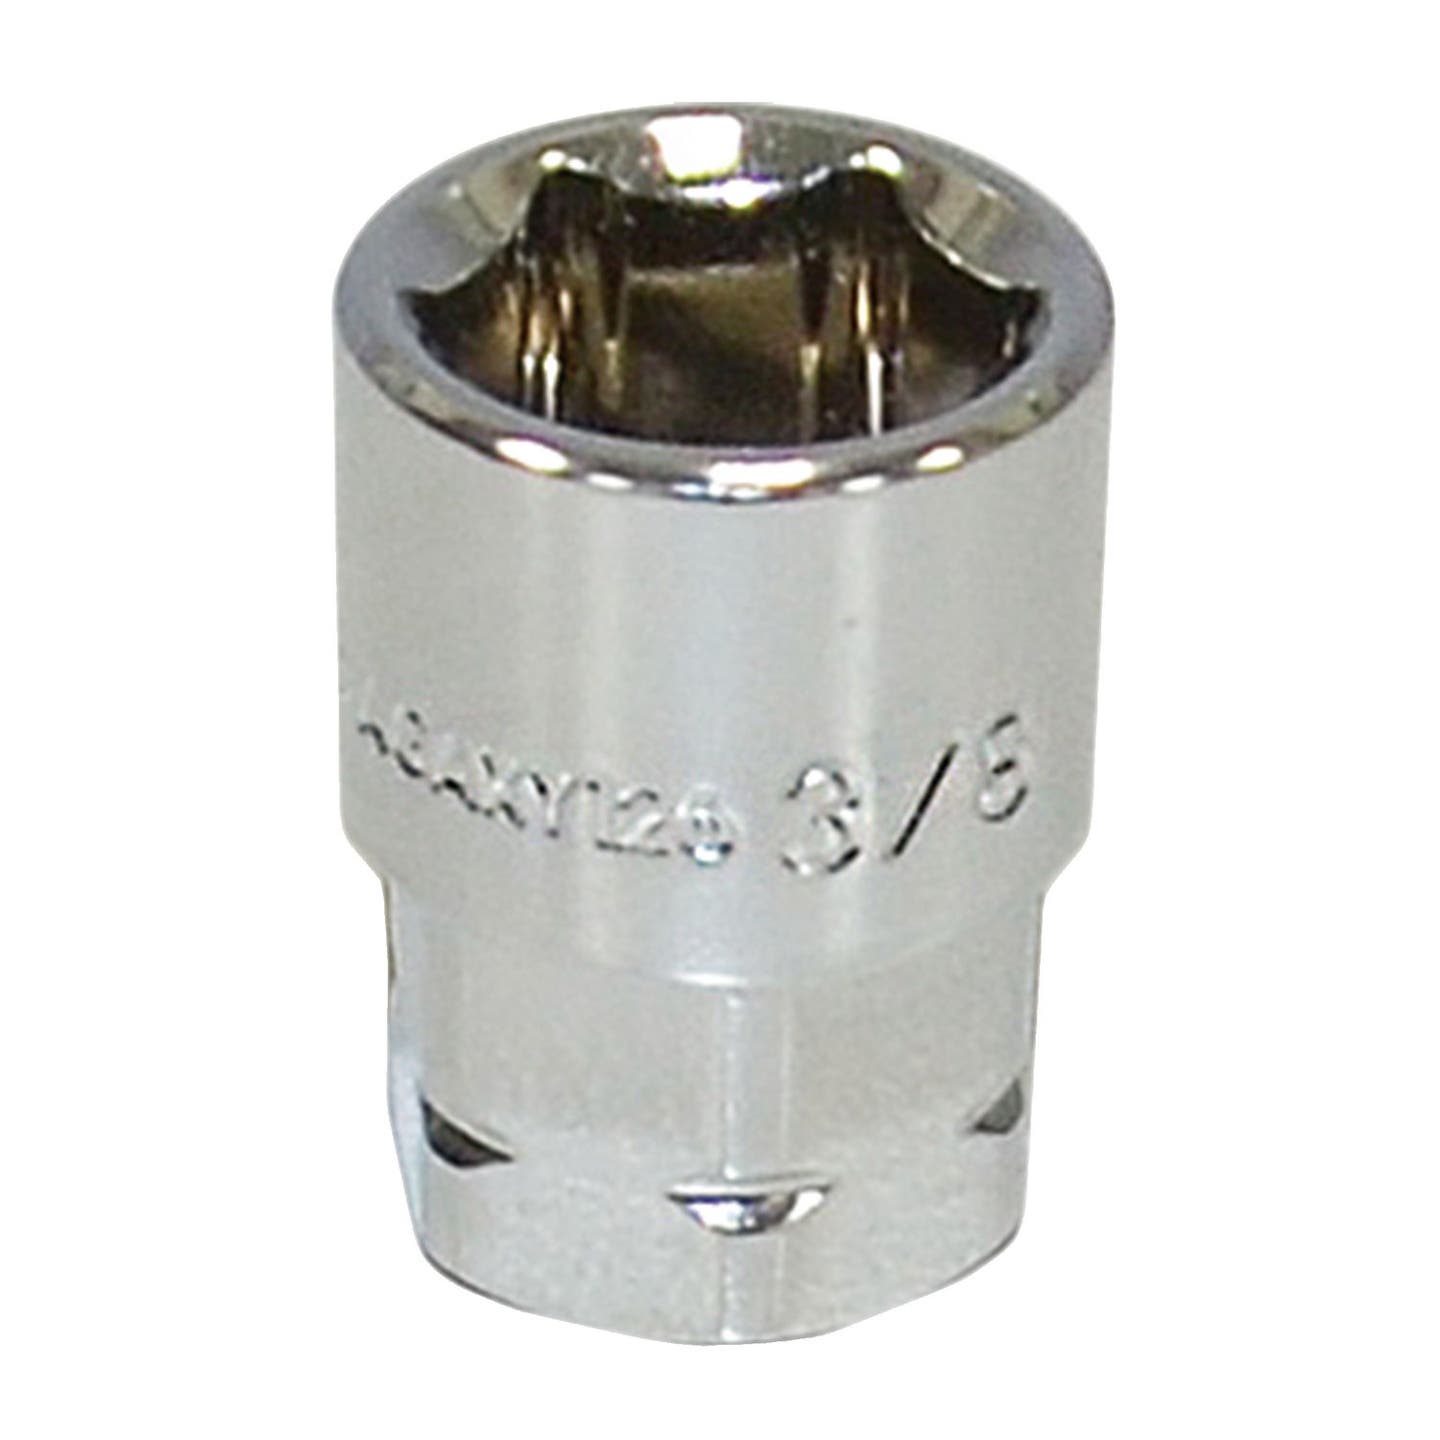 1/4" DRIVE 3/8" SAE 6 POINT LOW PROFILE SOCKET